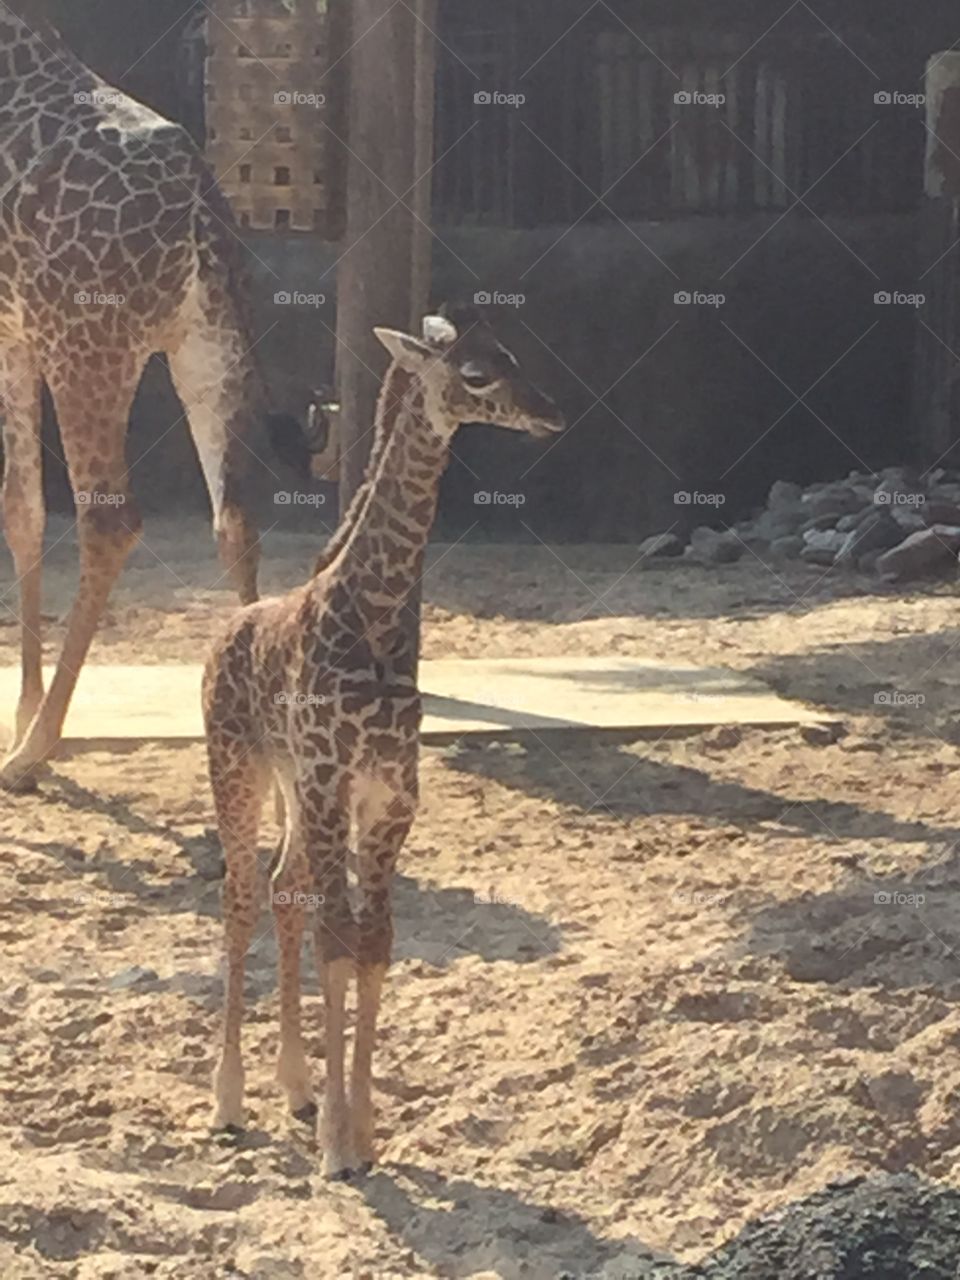 Baby at the Houston Zoo